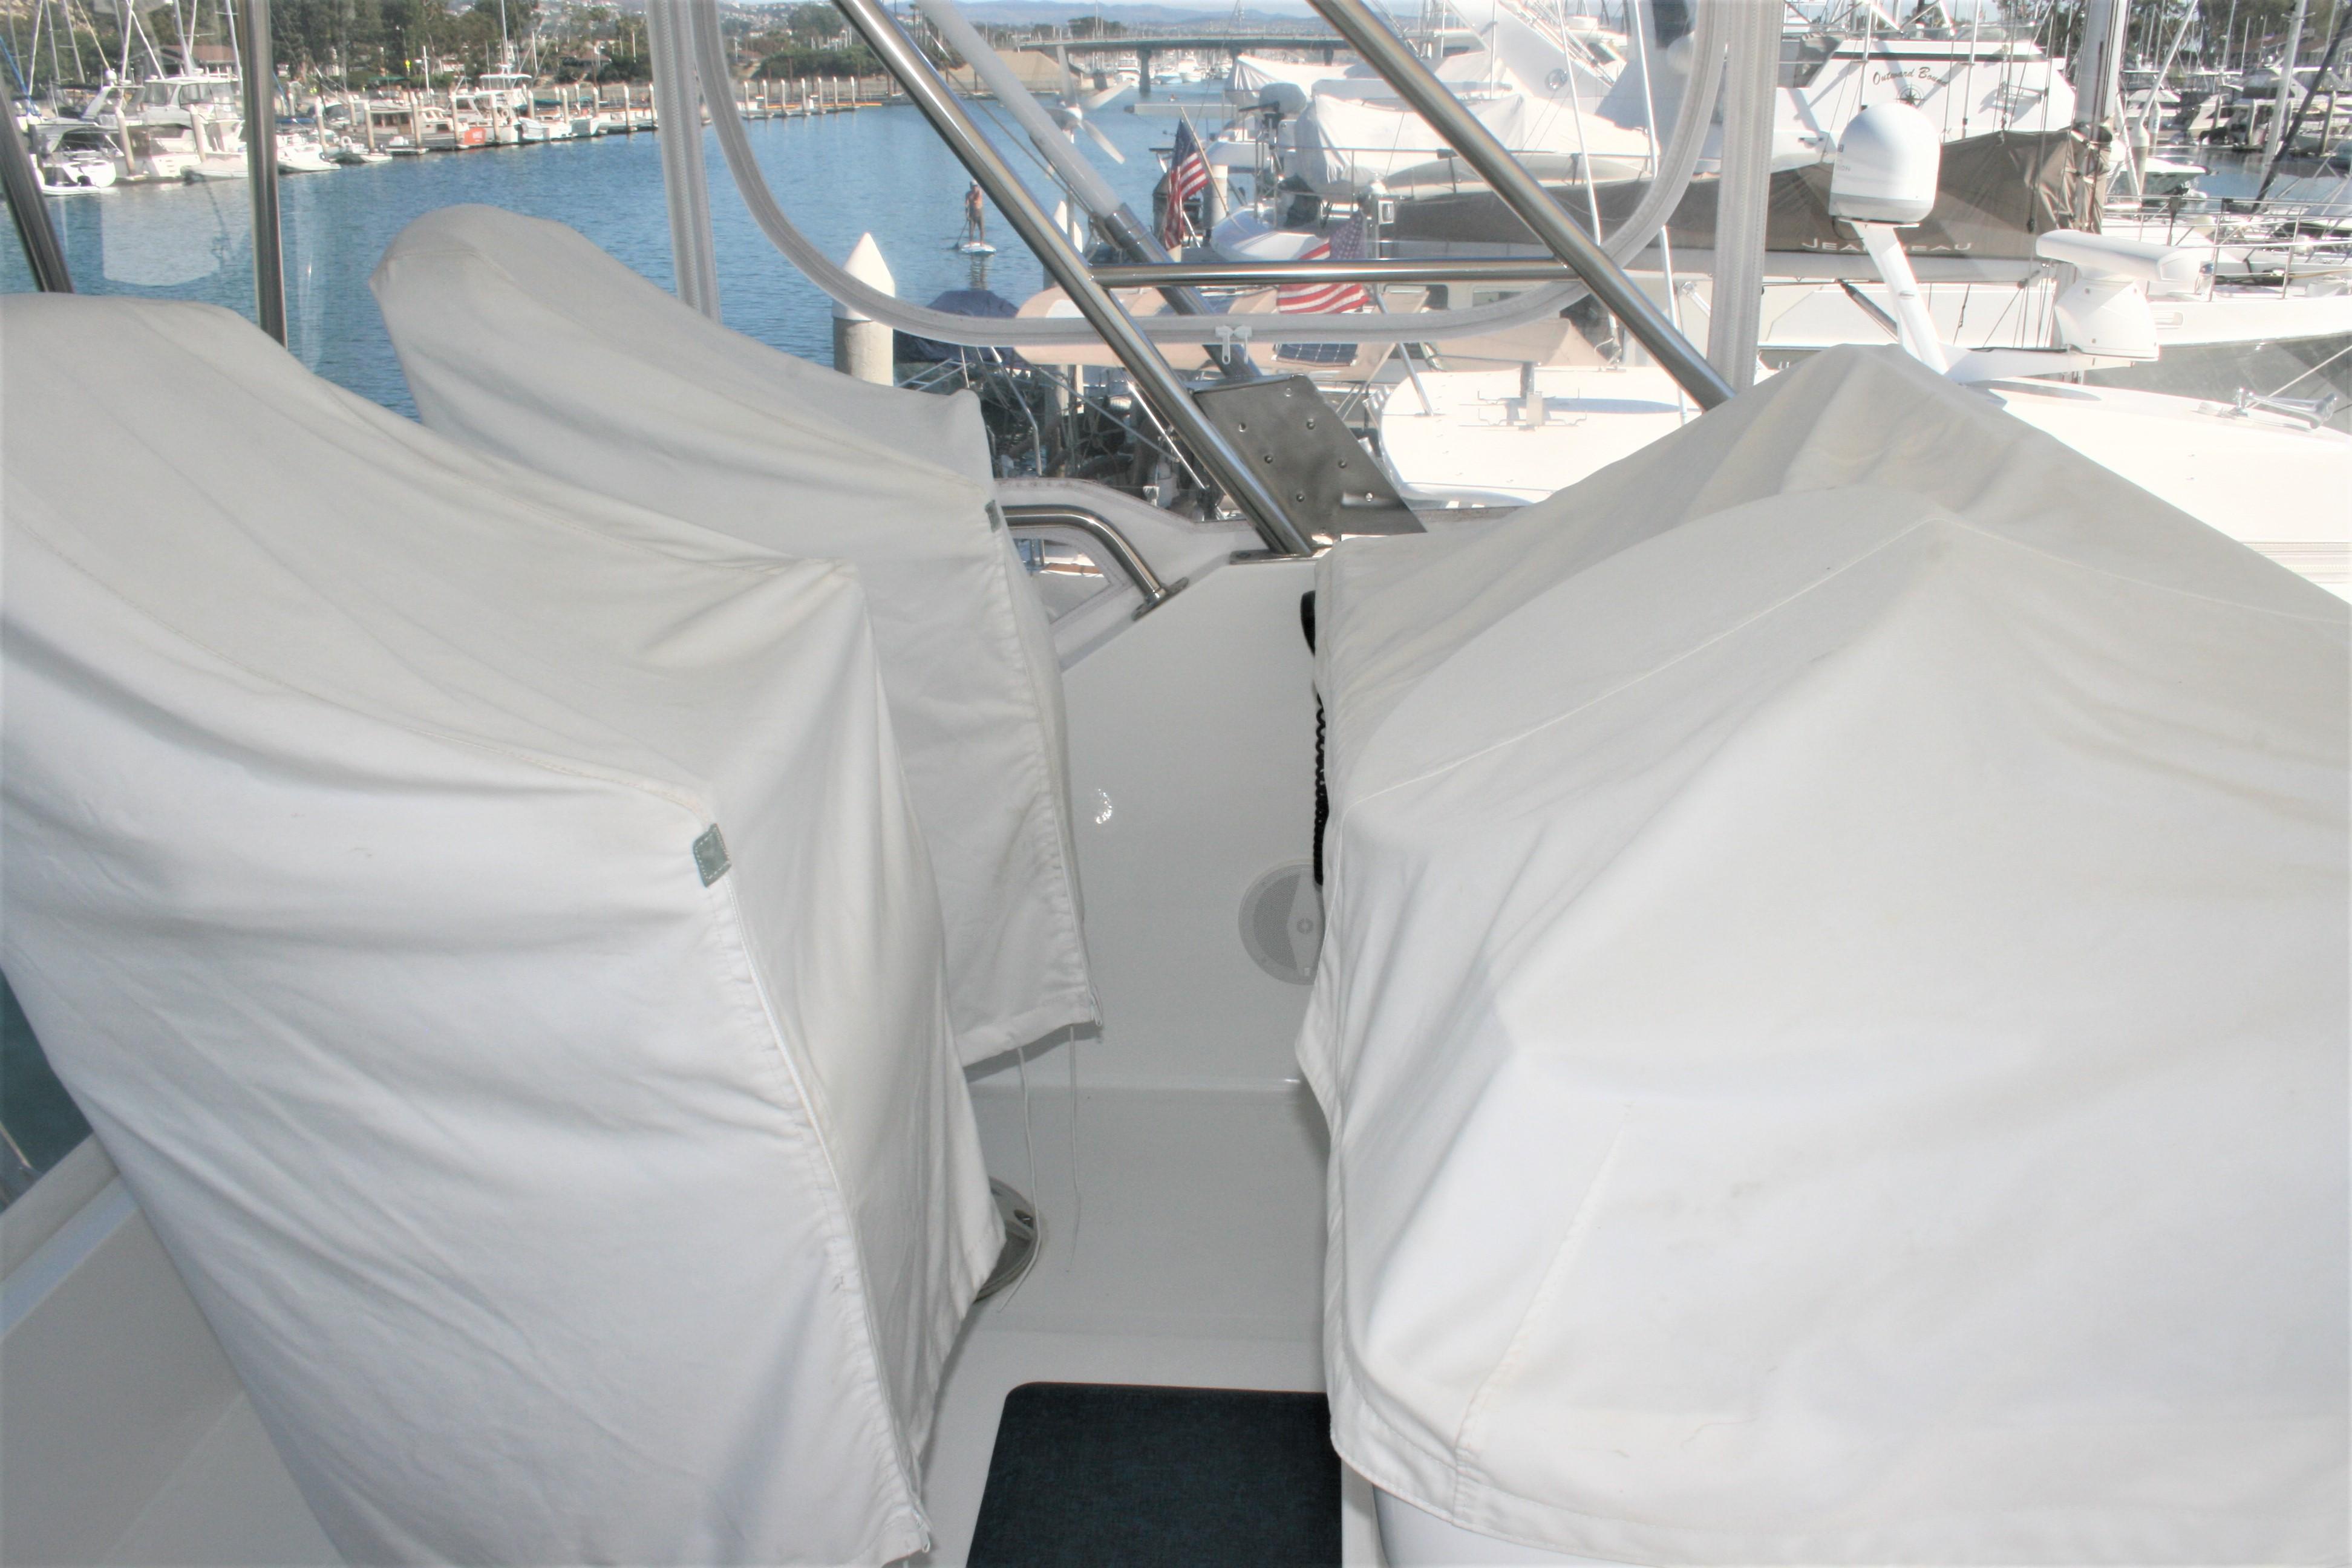 Helm Seats with Covers on